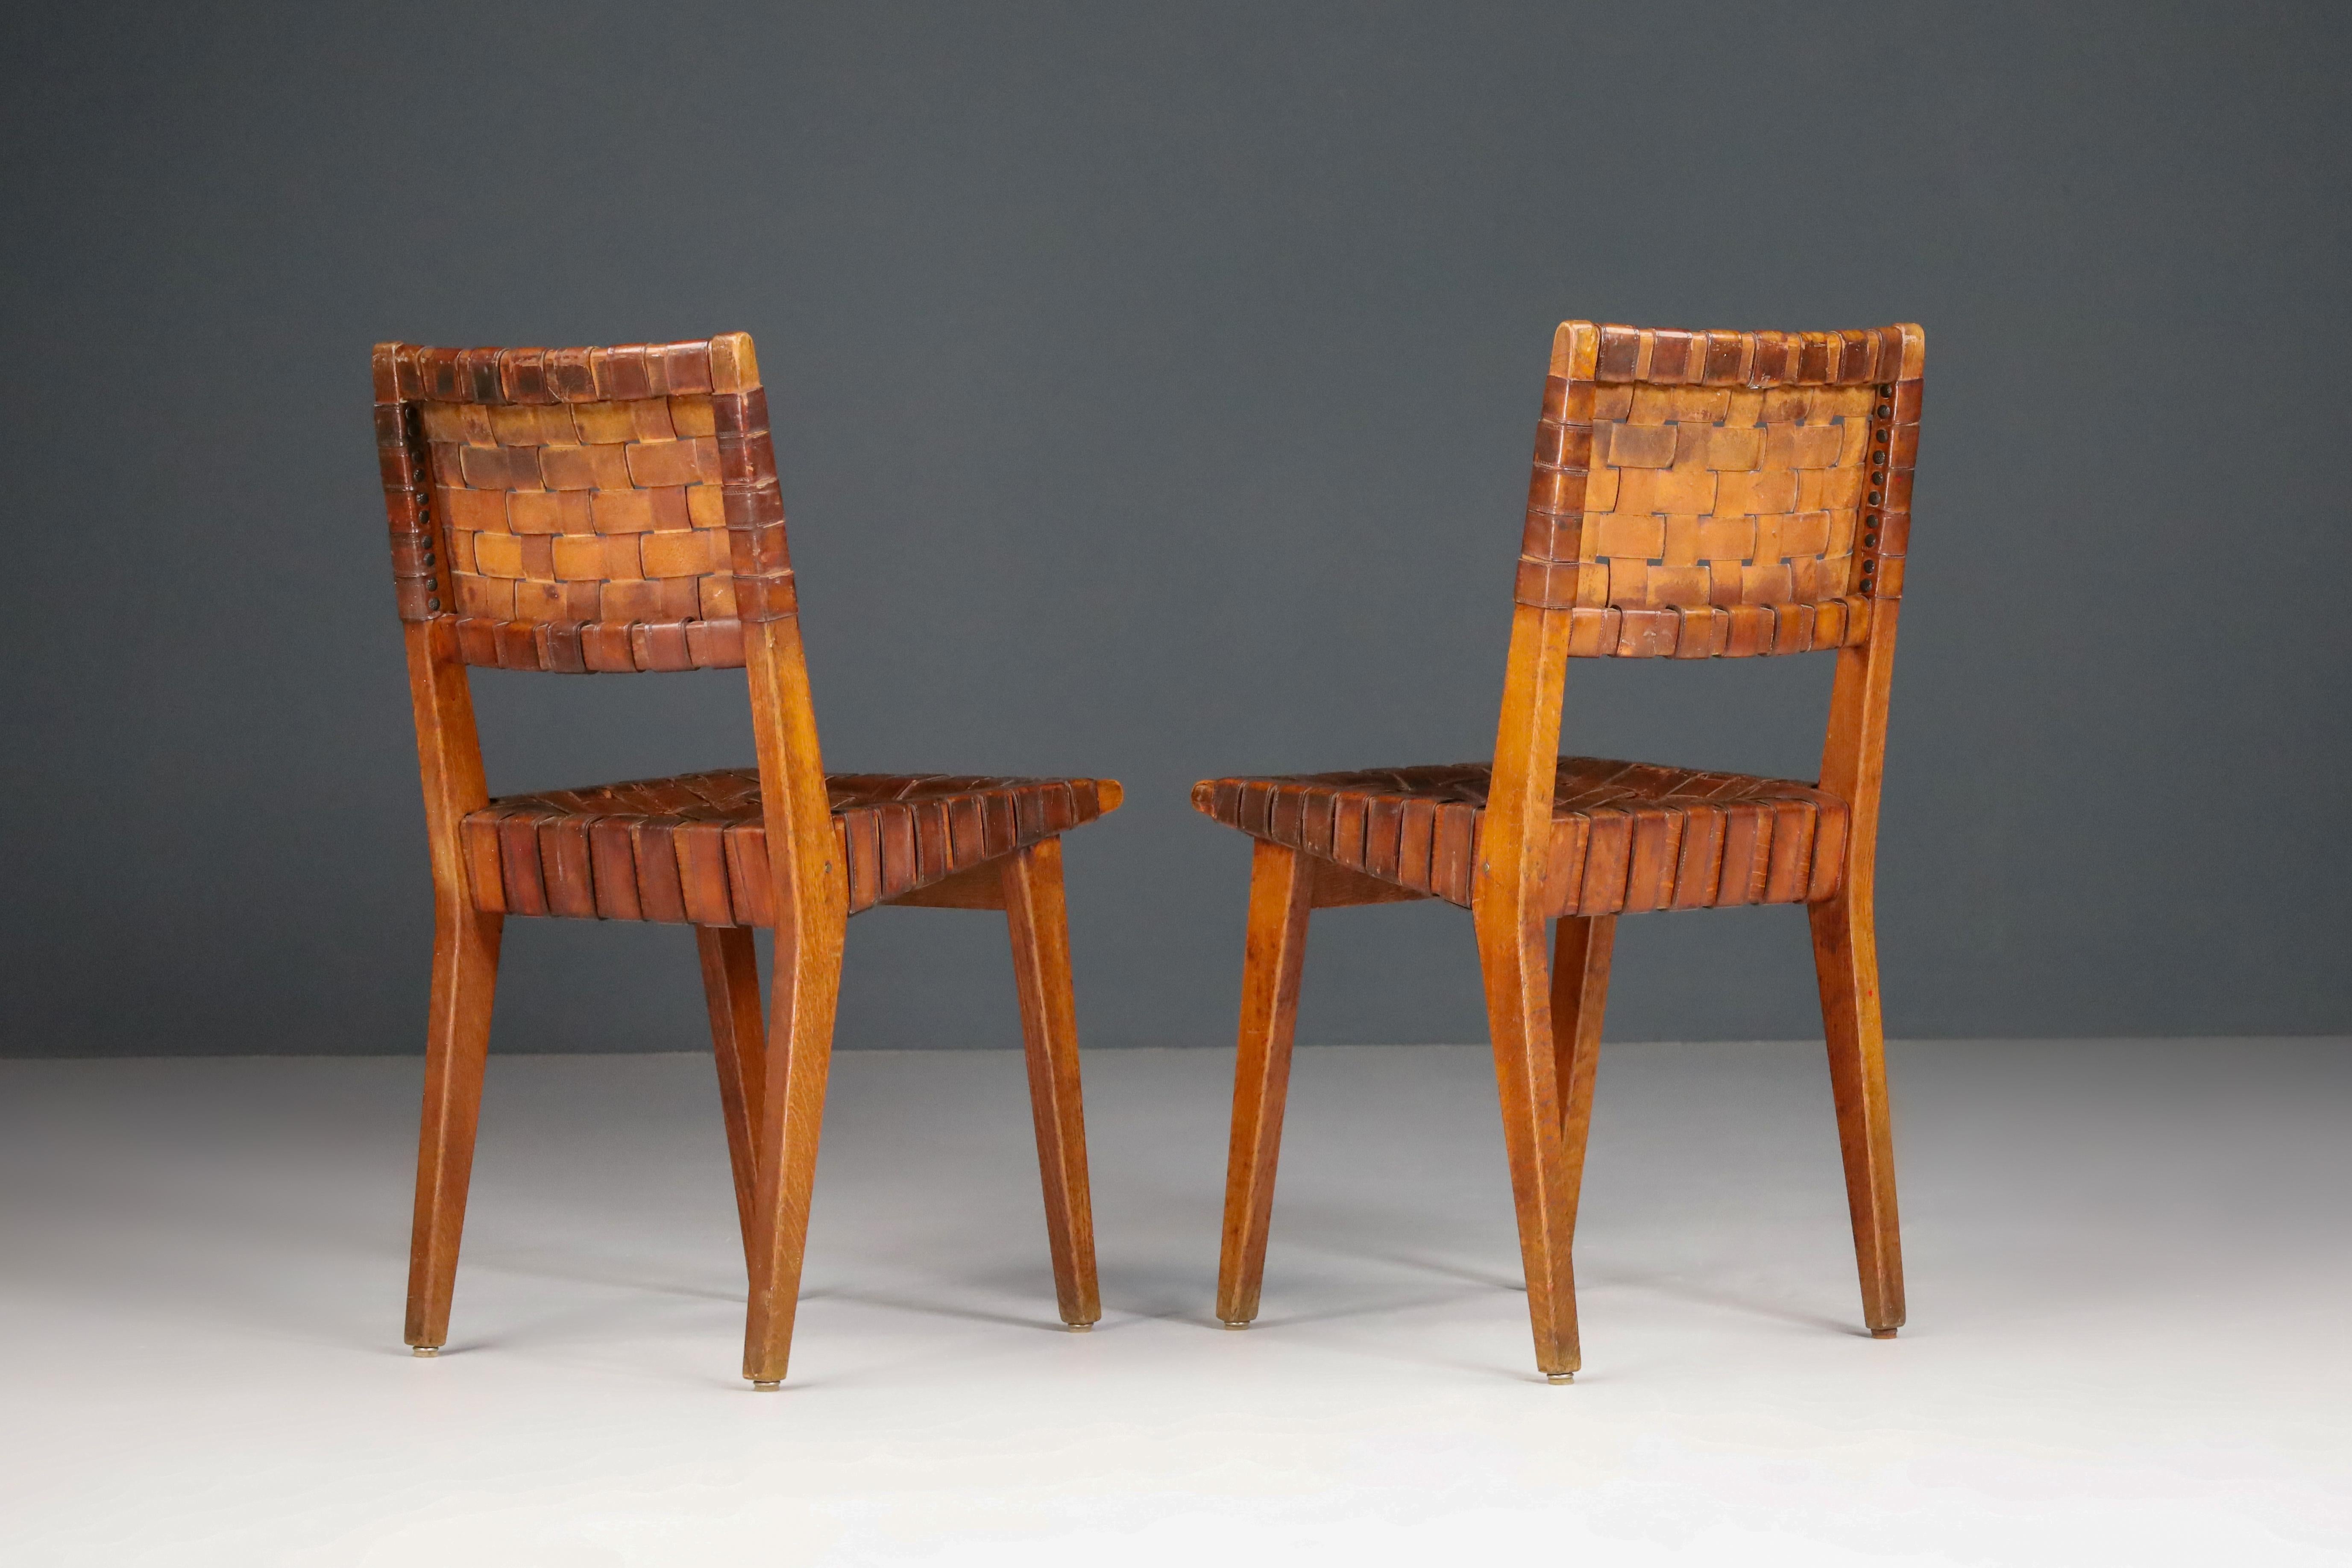 American Early Woven Leather Side Chairs Model No. 666 by Jens Risom for Knoll, 1940s